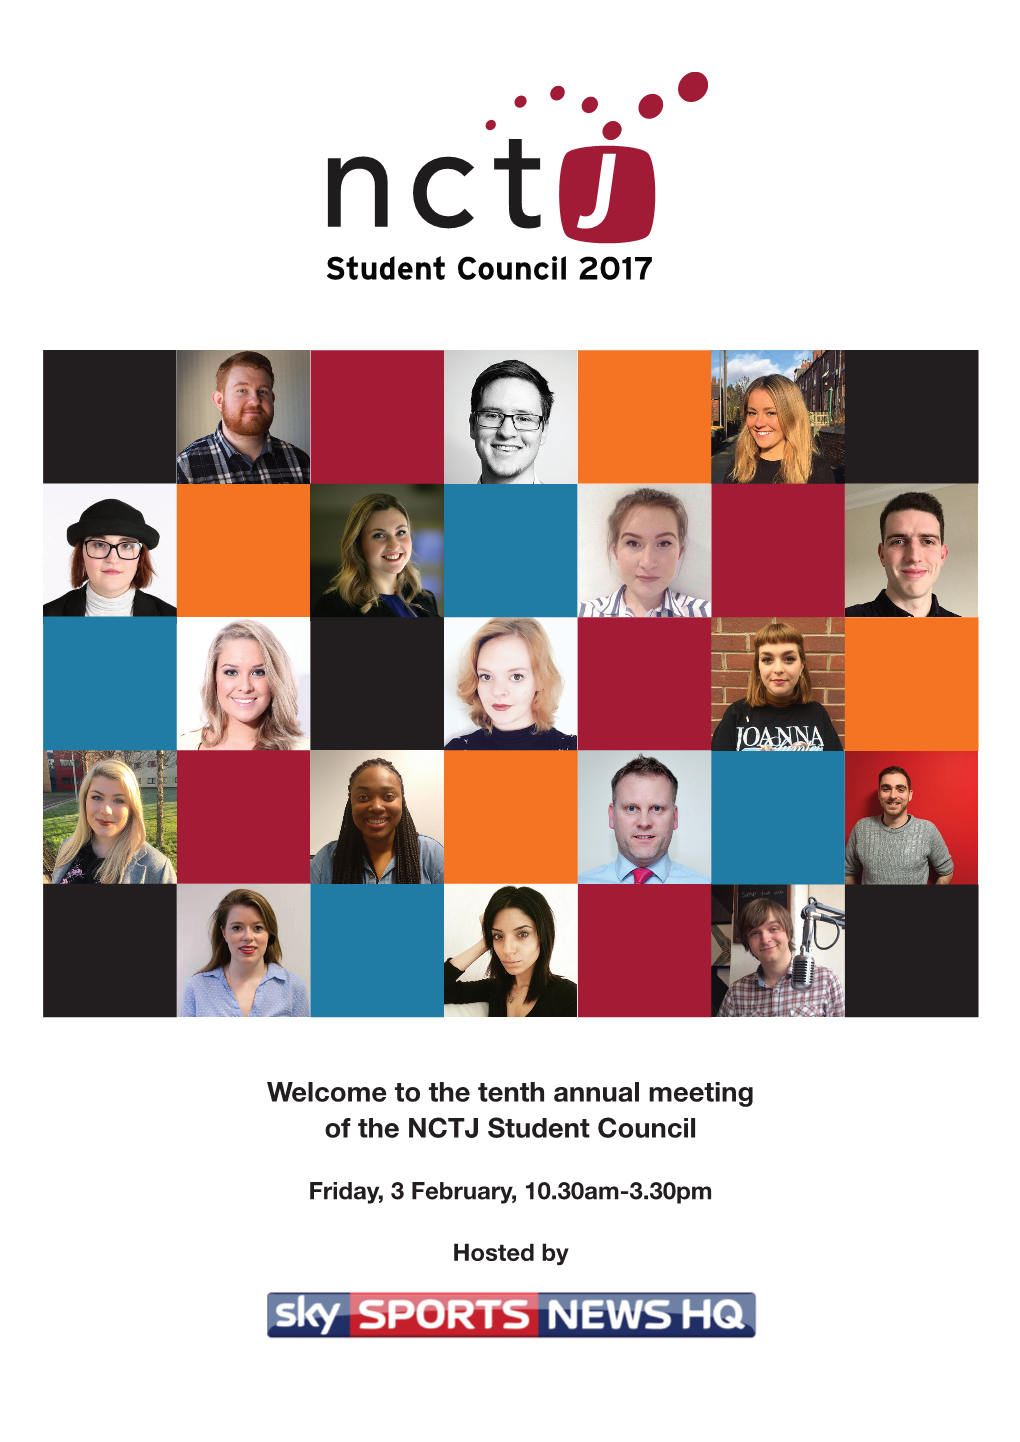 Welcome to the Tenth Annual Meeting of the NCTJ Student Council